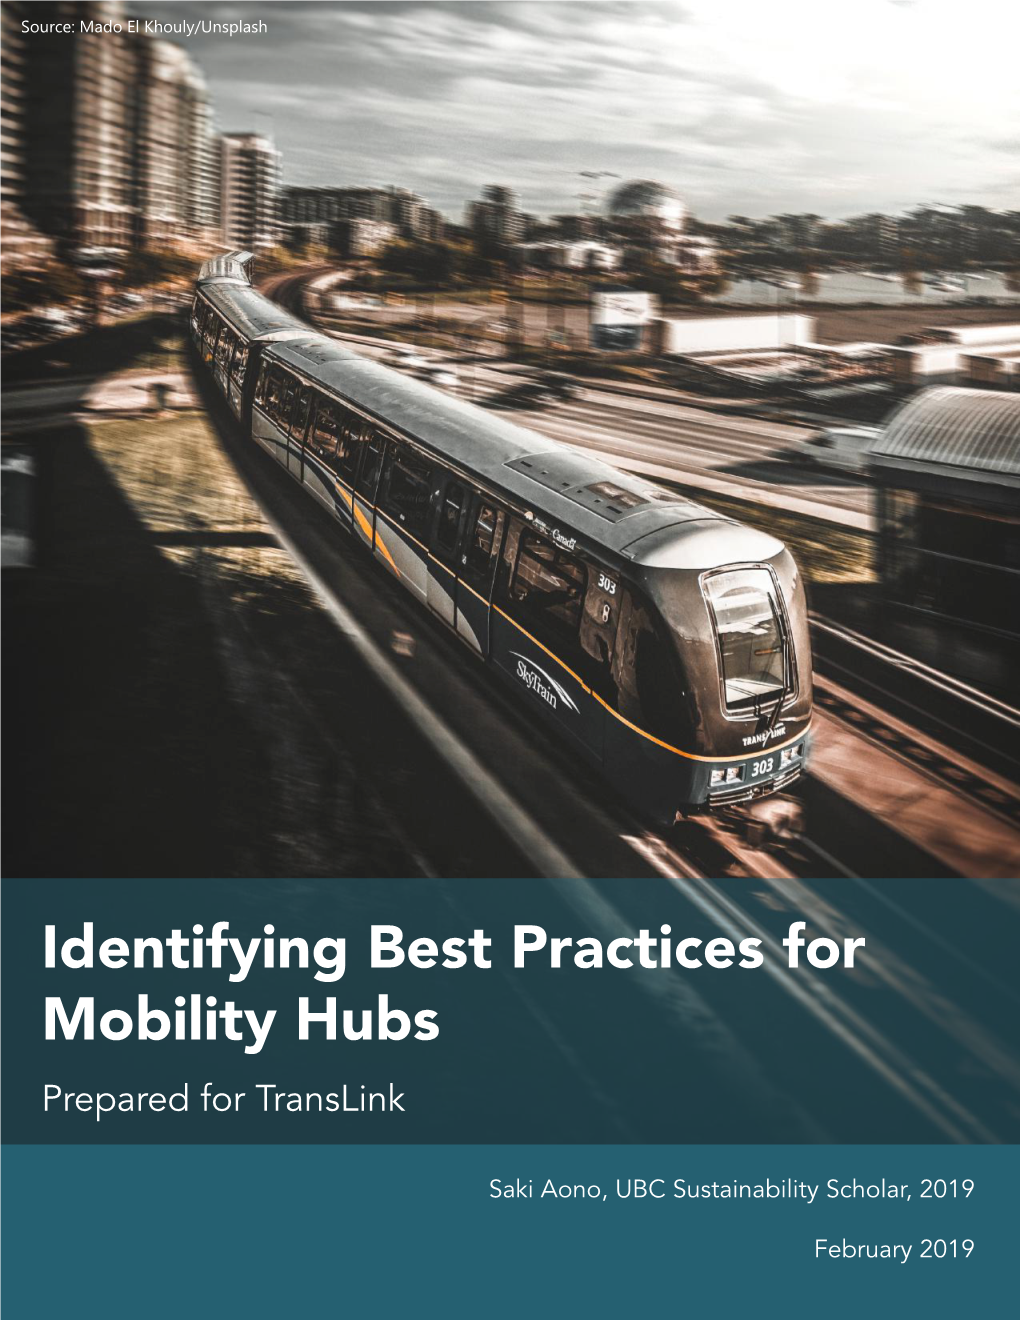 Identifying Best Practices for Mobility Hubs Prepared for Translink